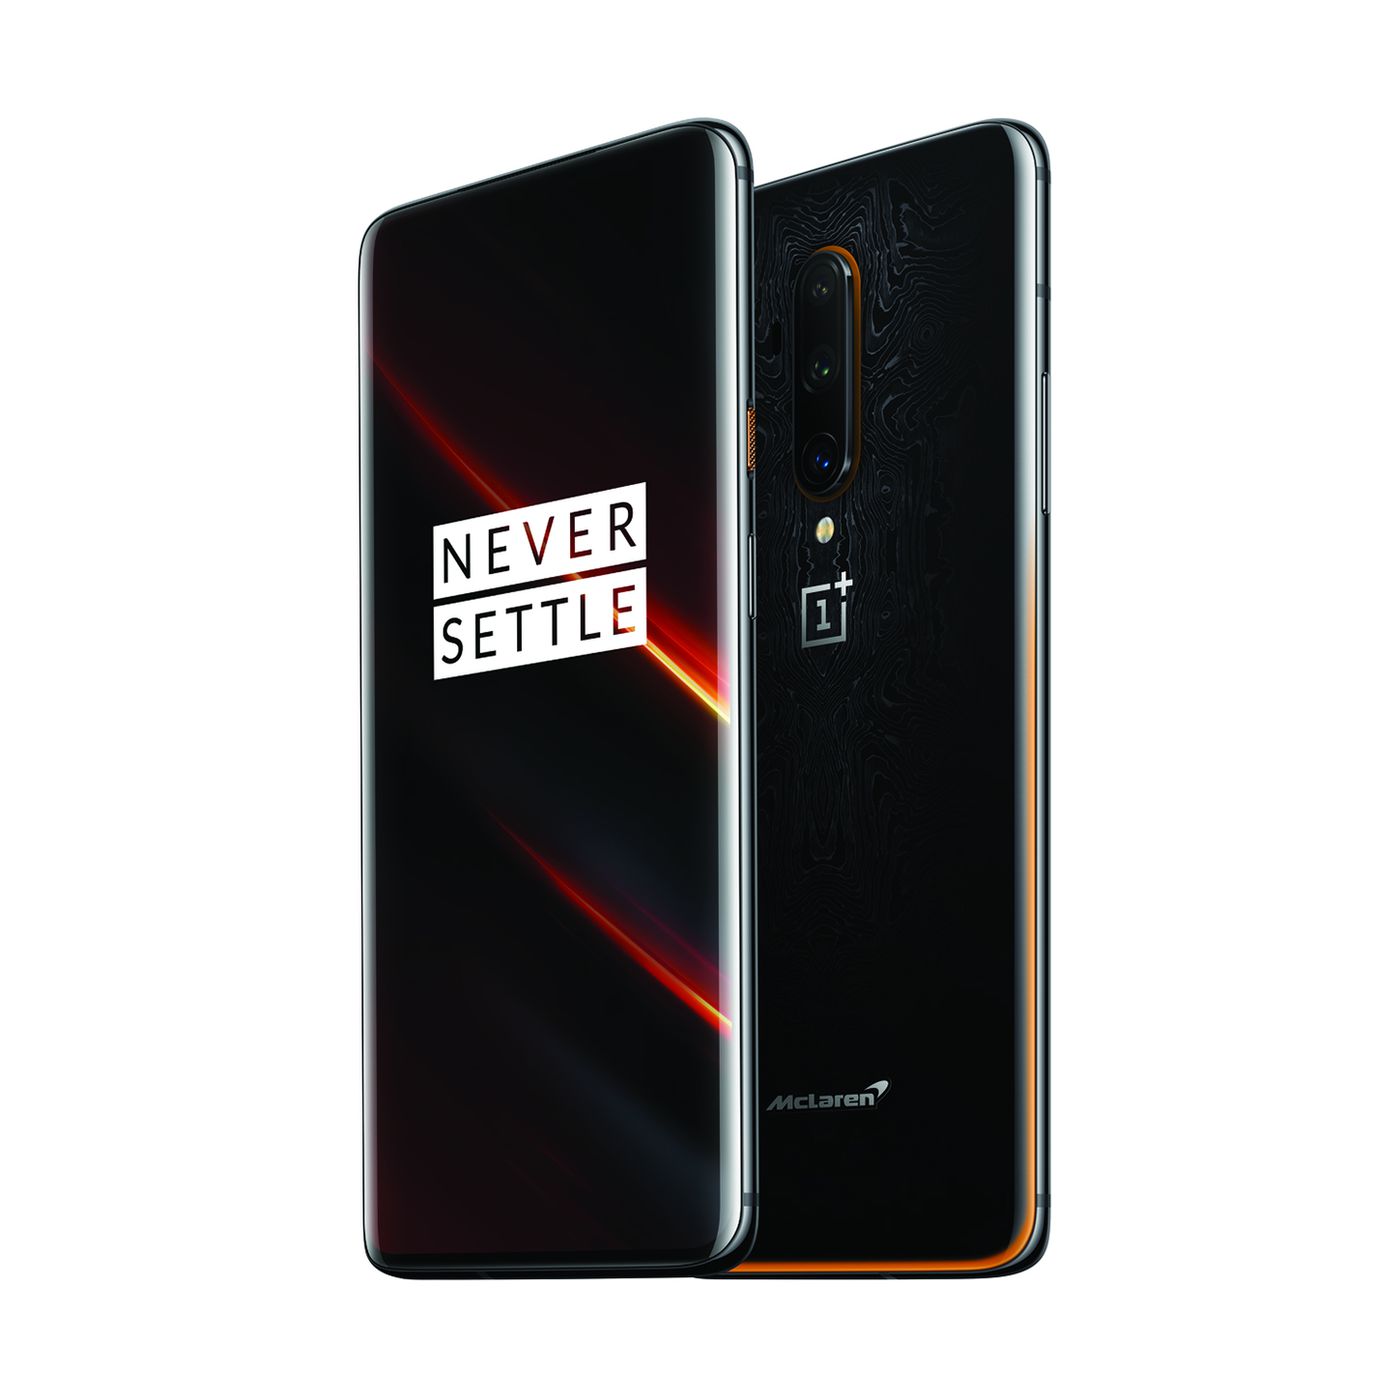 The OnePlus 7T Pro McLaren Edition is T-Mobile's second 5G phone 